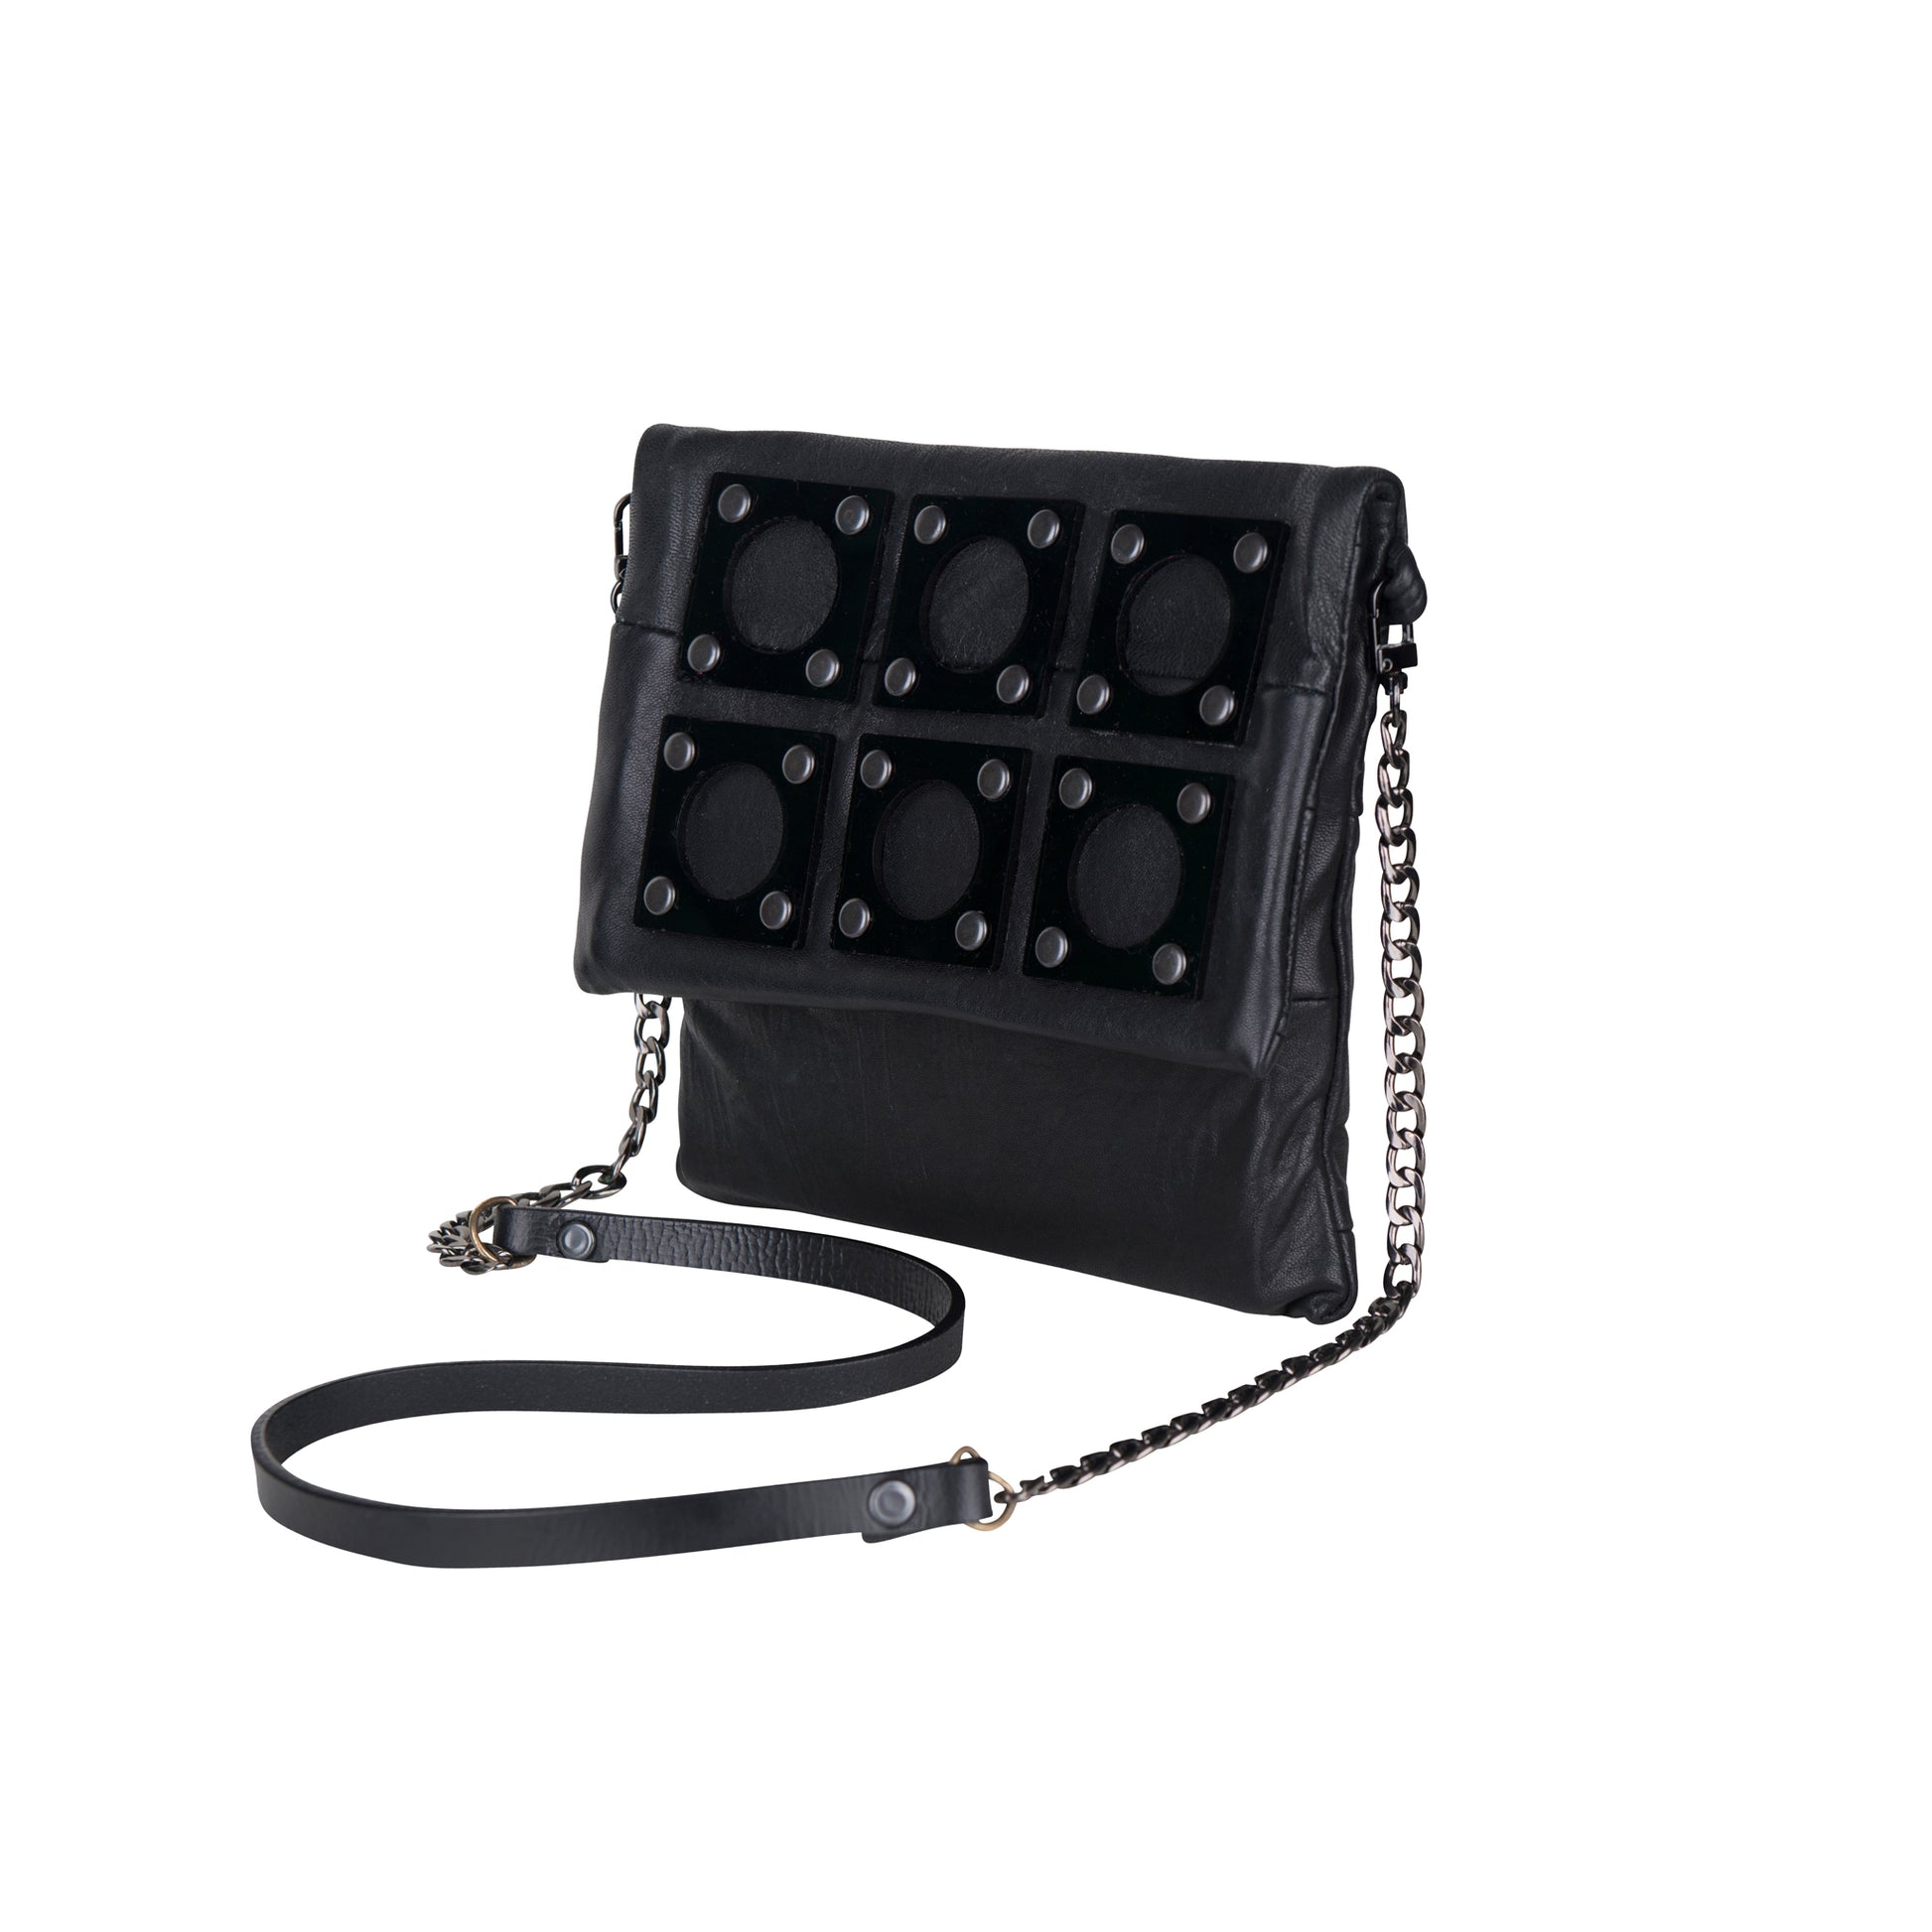 METANoIA black recycled leather small handbag with square and hollowed circle bamboo and walnut acrylic forms fashioned into a repetitive fashion pictured on a side profile.